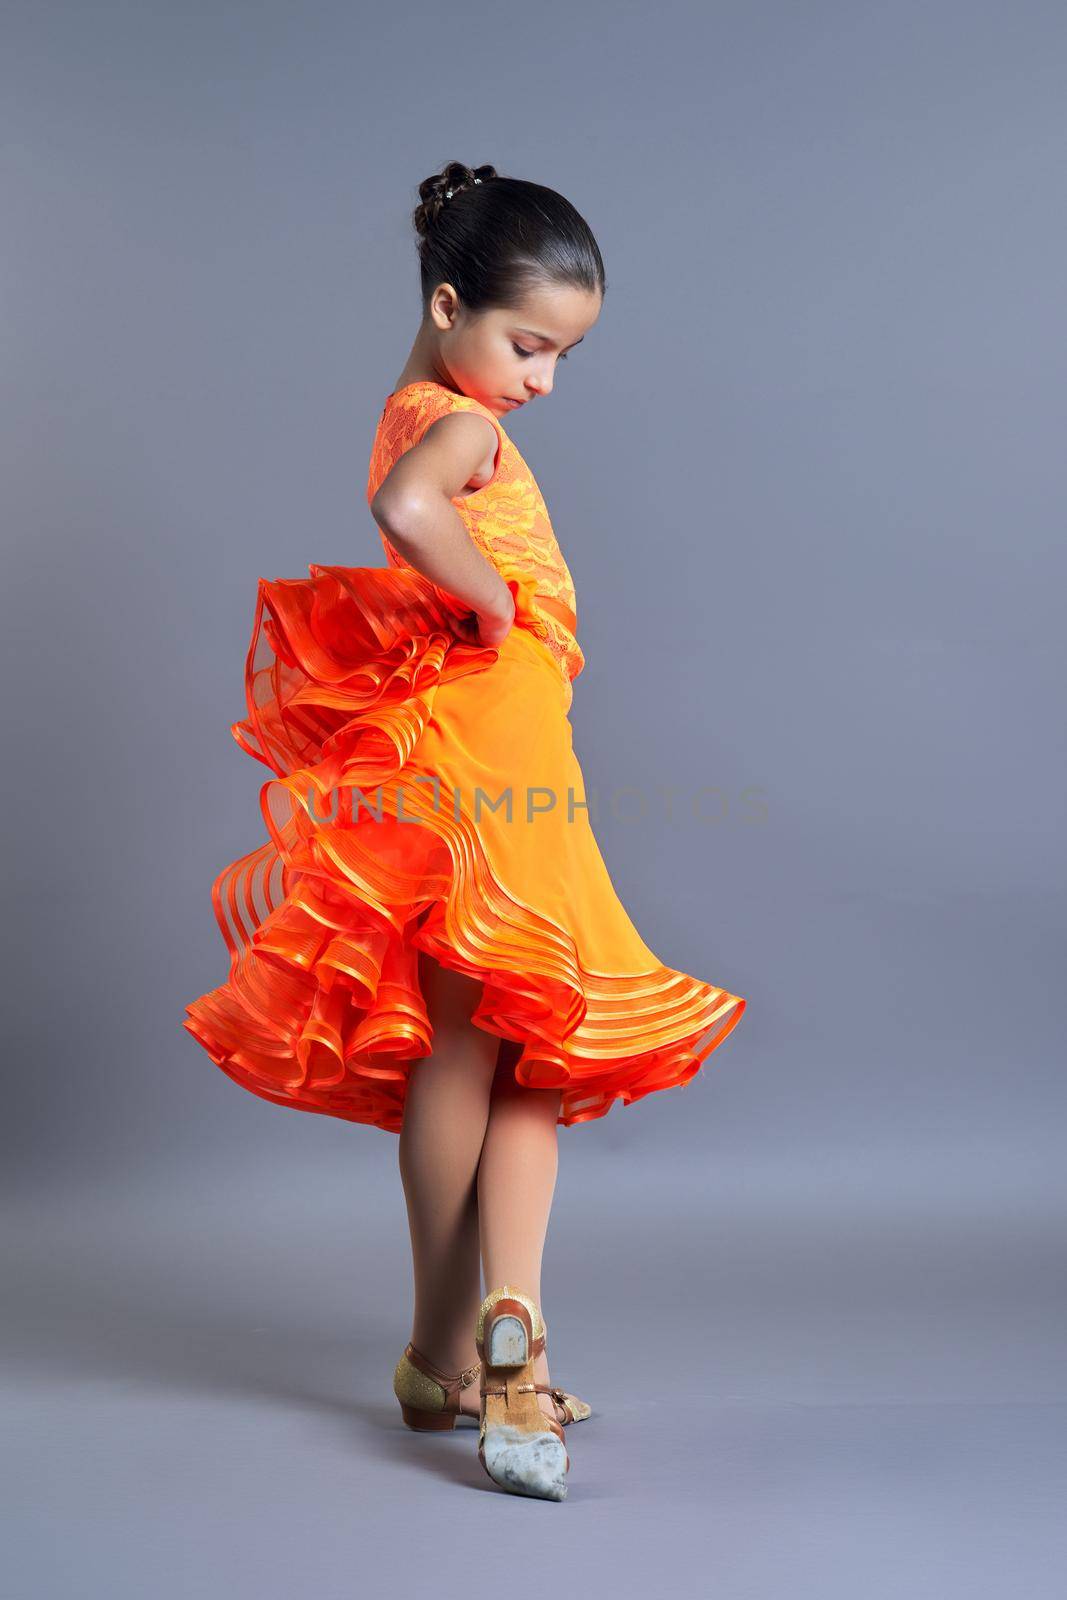 Child girl in an orange sports dress posing in dance movement on gray background by VH-studio